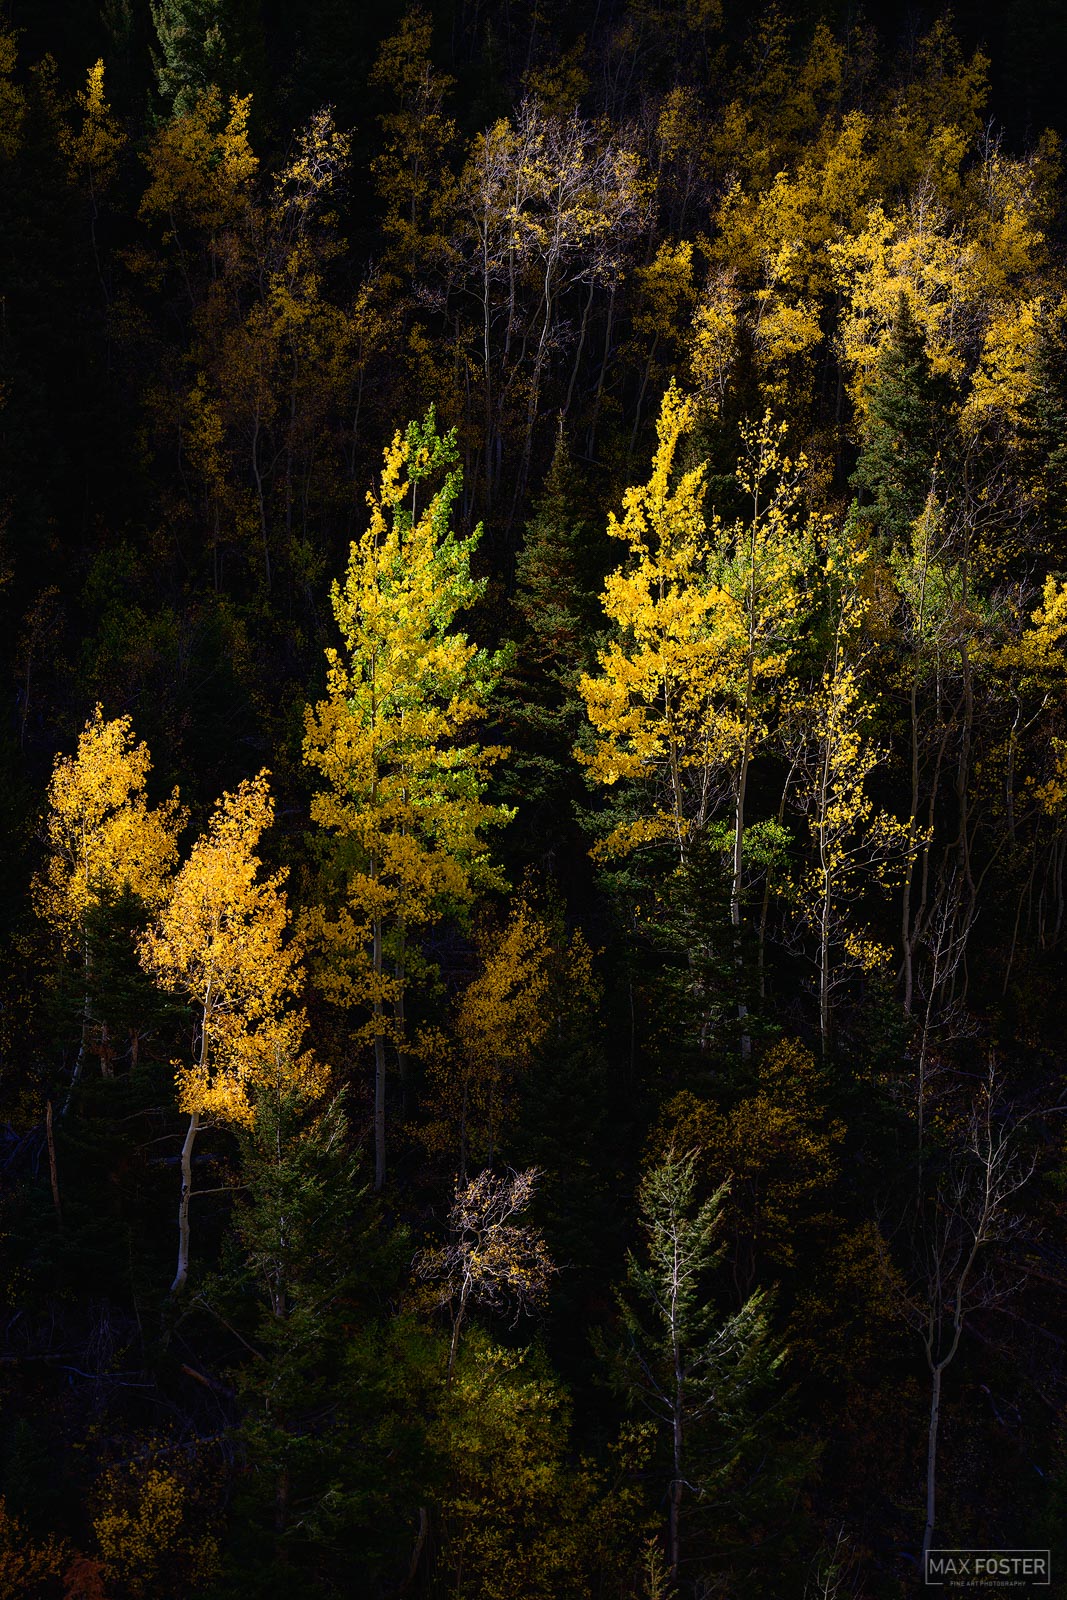 Bring nature into your home with The Blink Of An Eye, Max Foster's limited edition photography print of Aspen trees in Colorado...